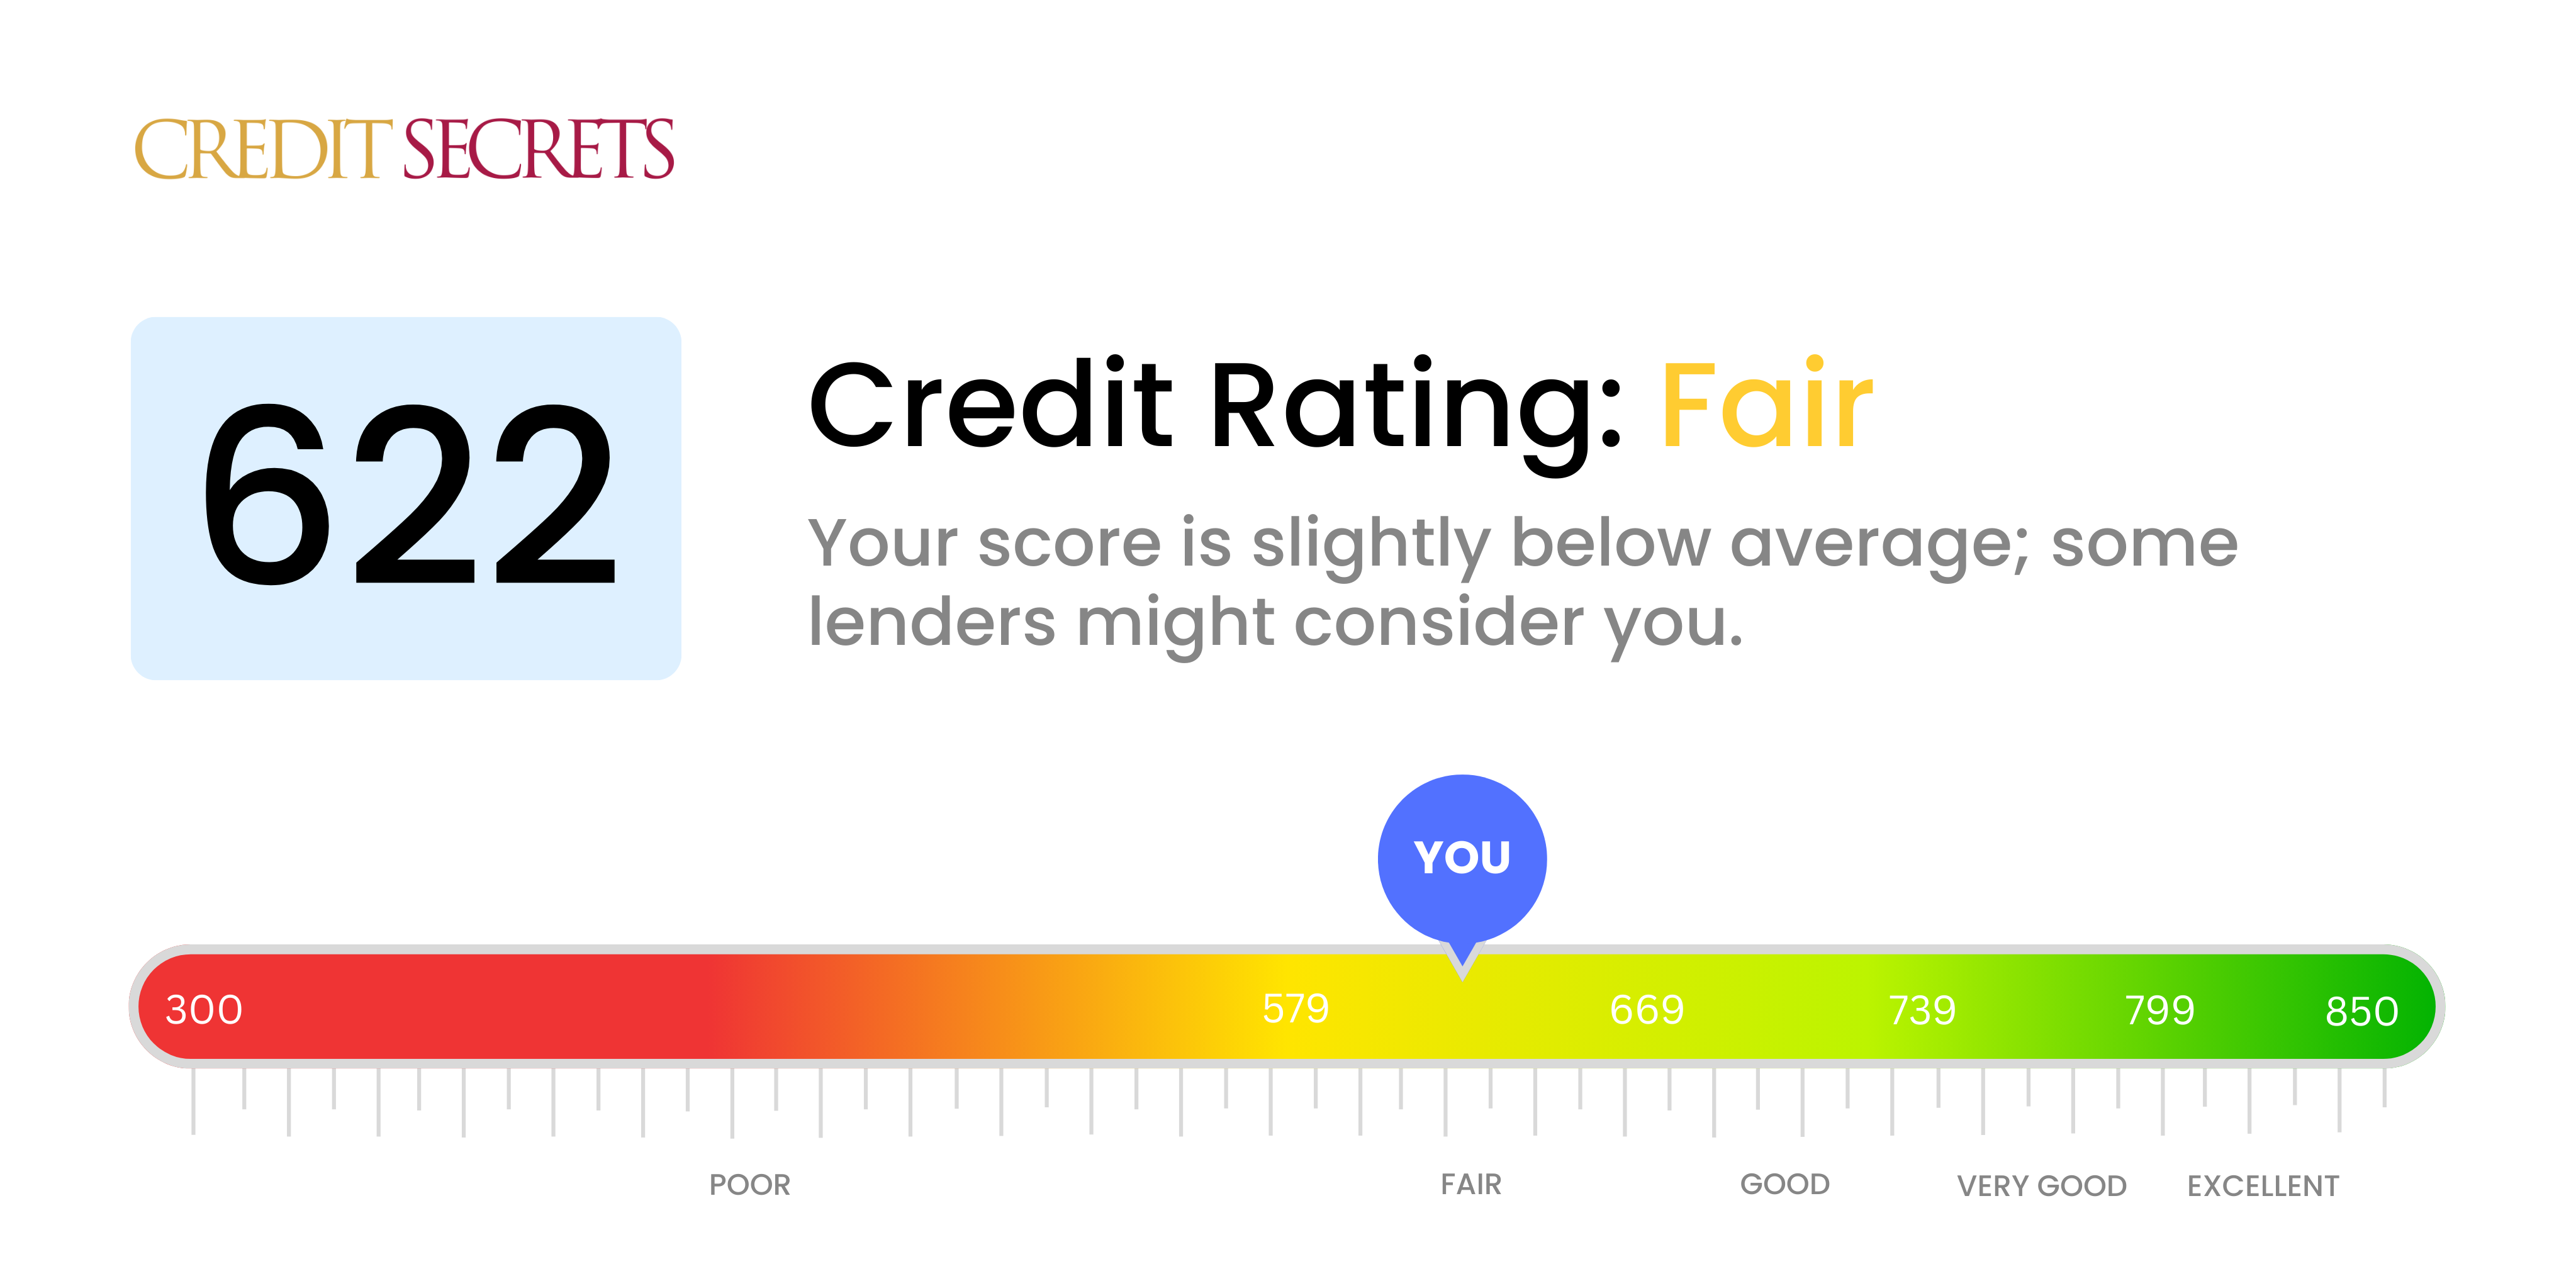 Is 622 a good credit score?